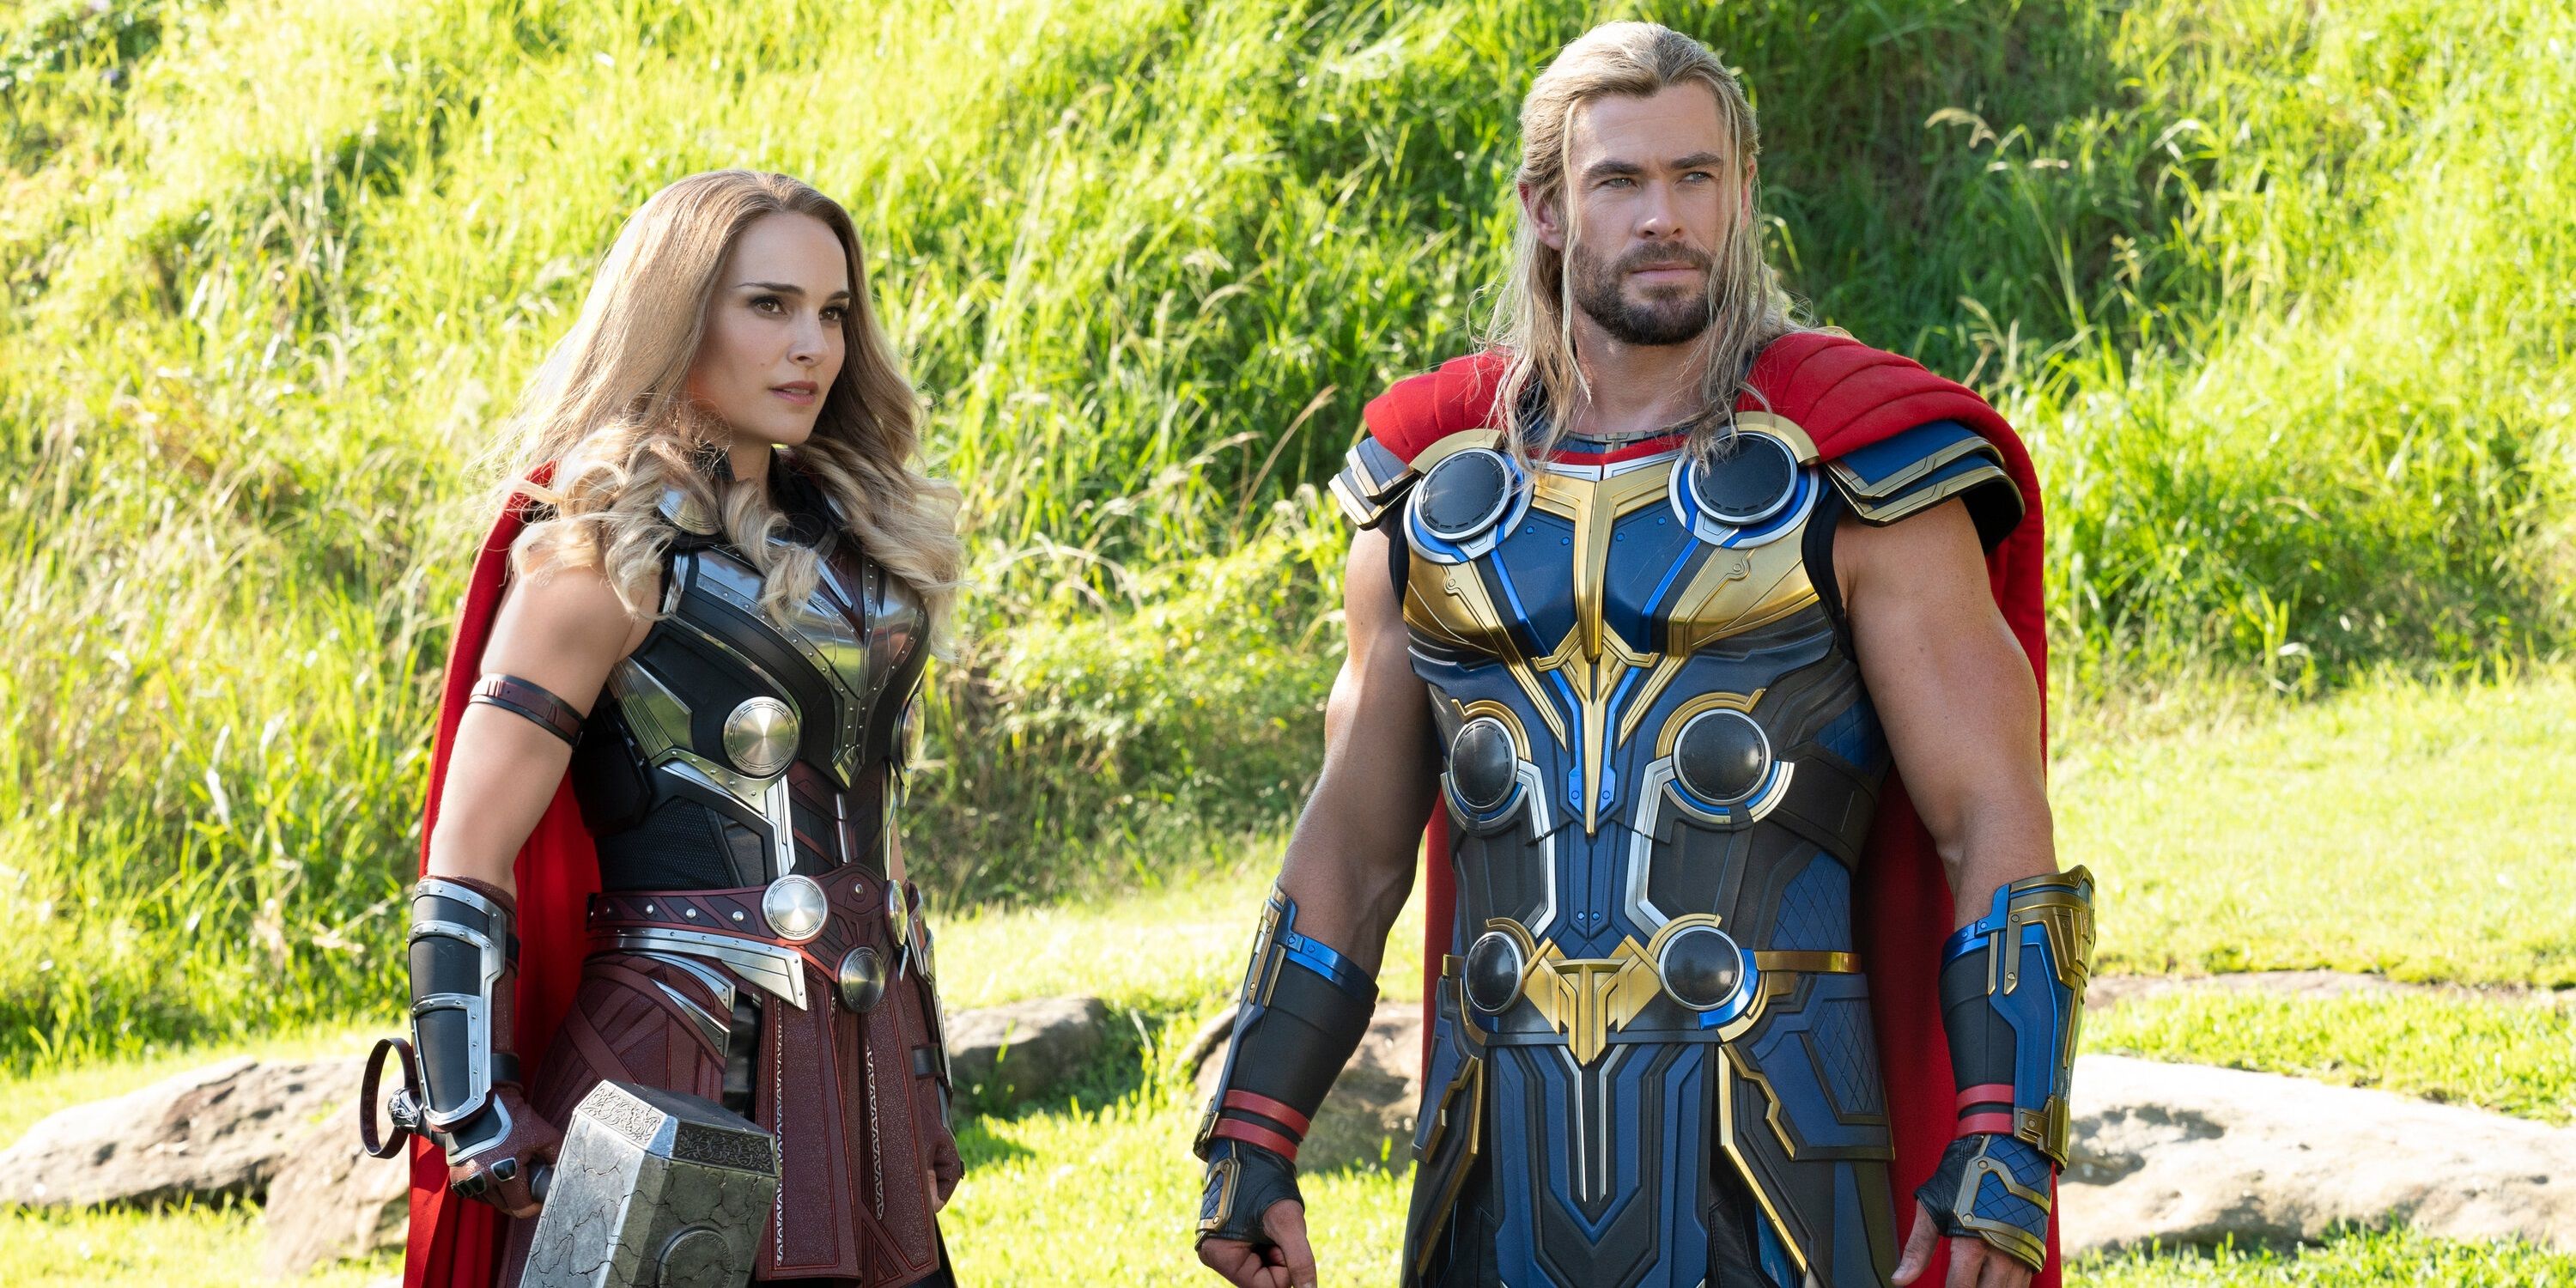 Chris-Hemsworth-and-Natalie-Portman-in-Thor-Love-and-Thunder-1